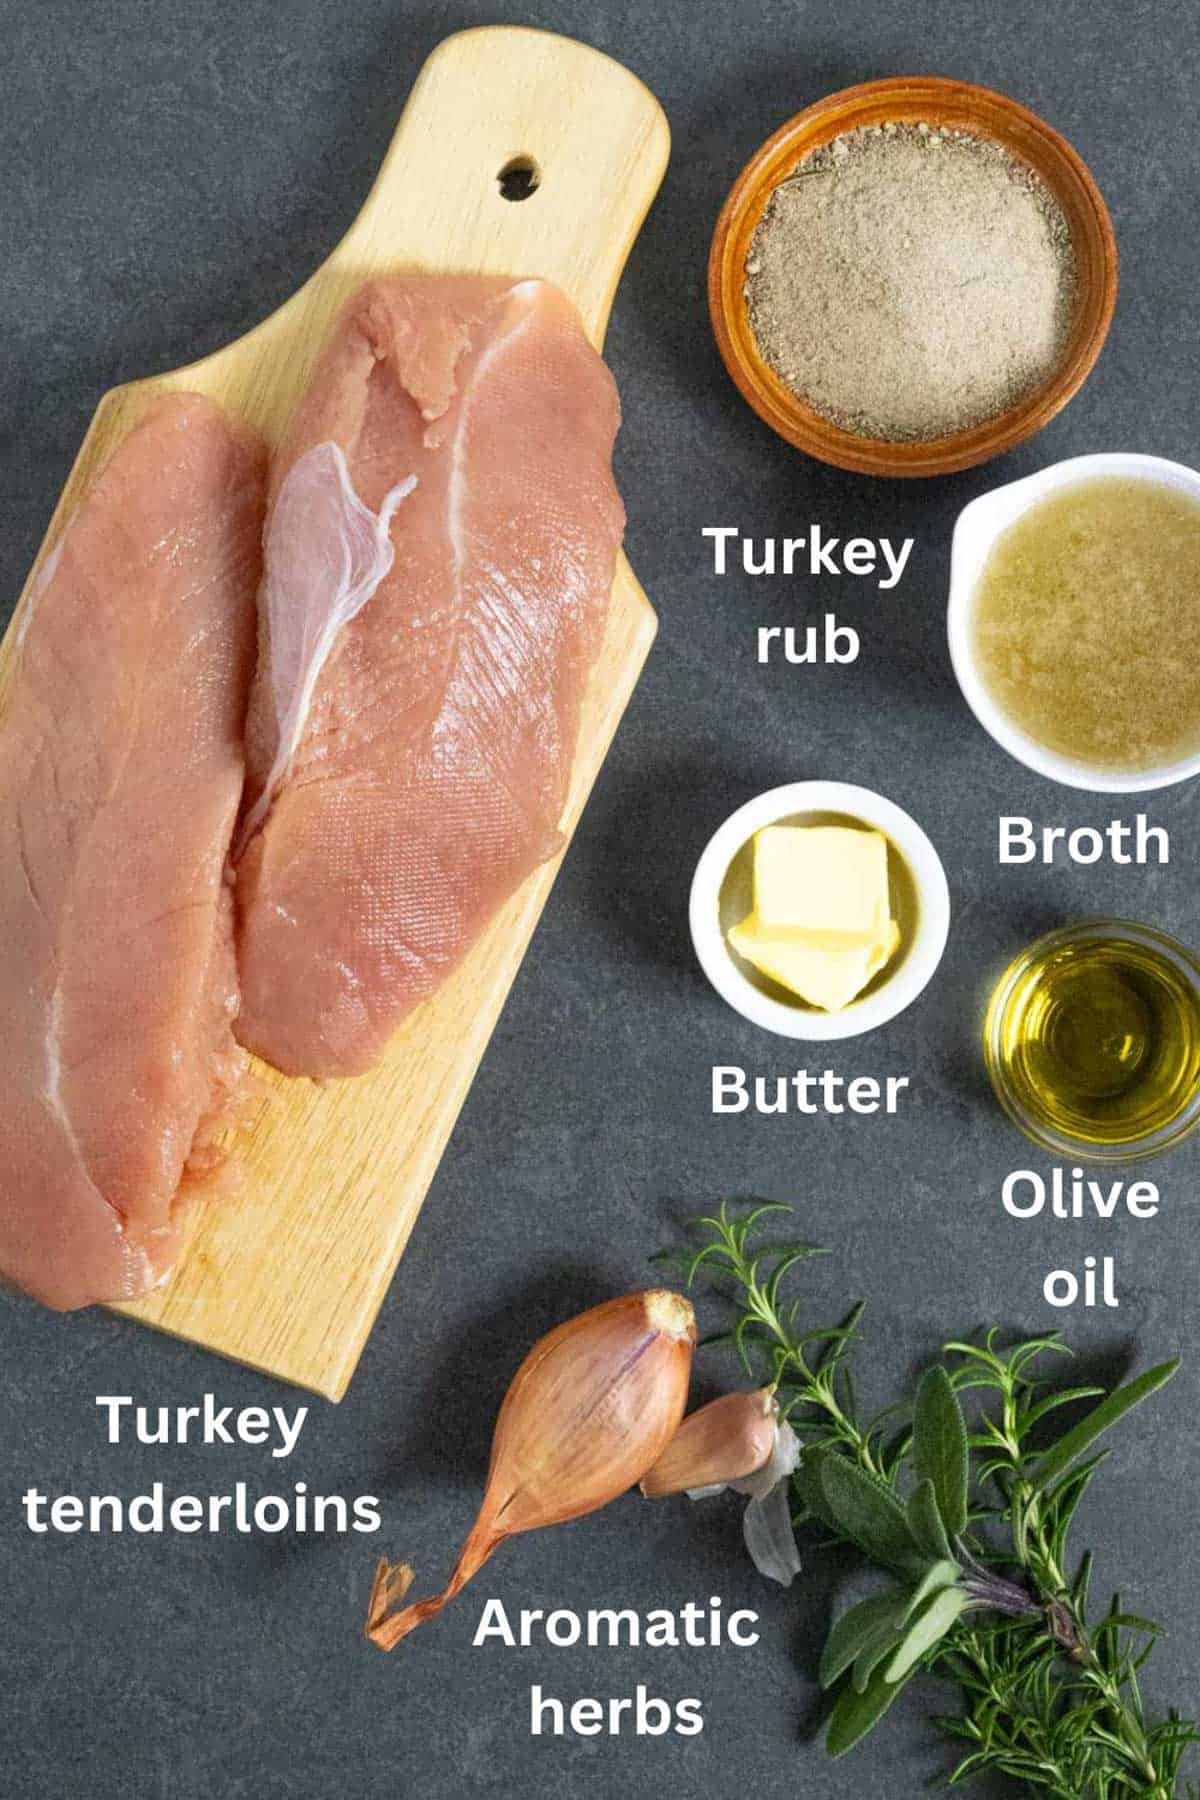 Ingredients in small bowls with turkey breast tenders, all with white text labels.